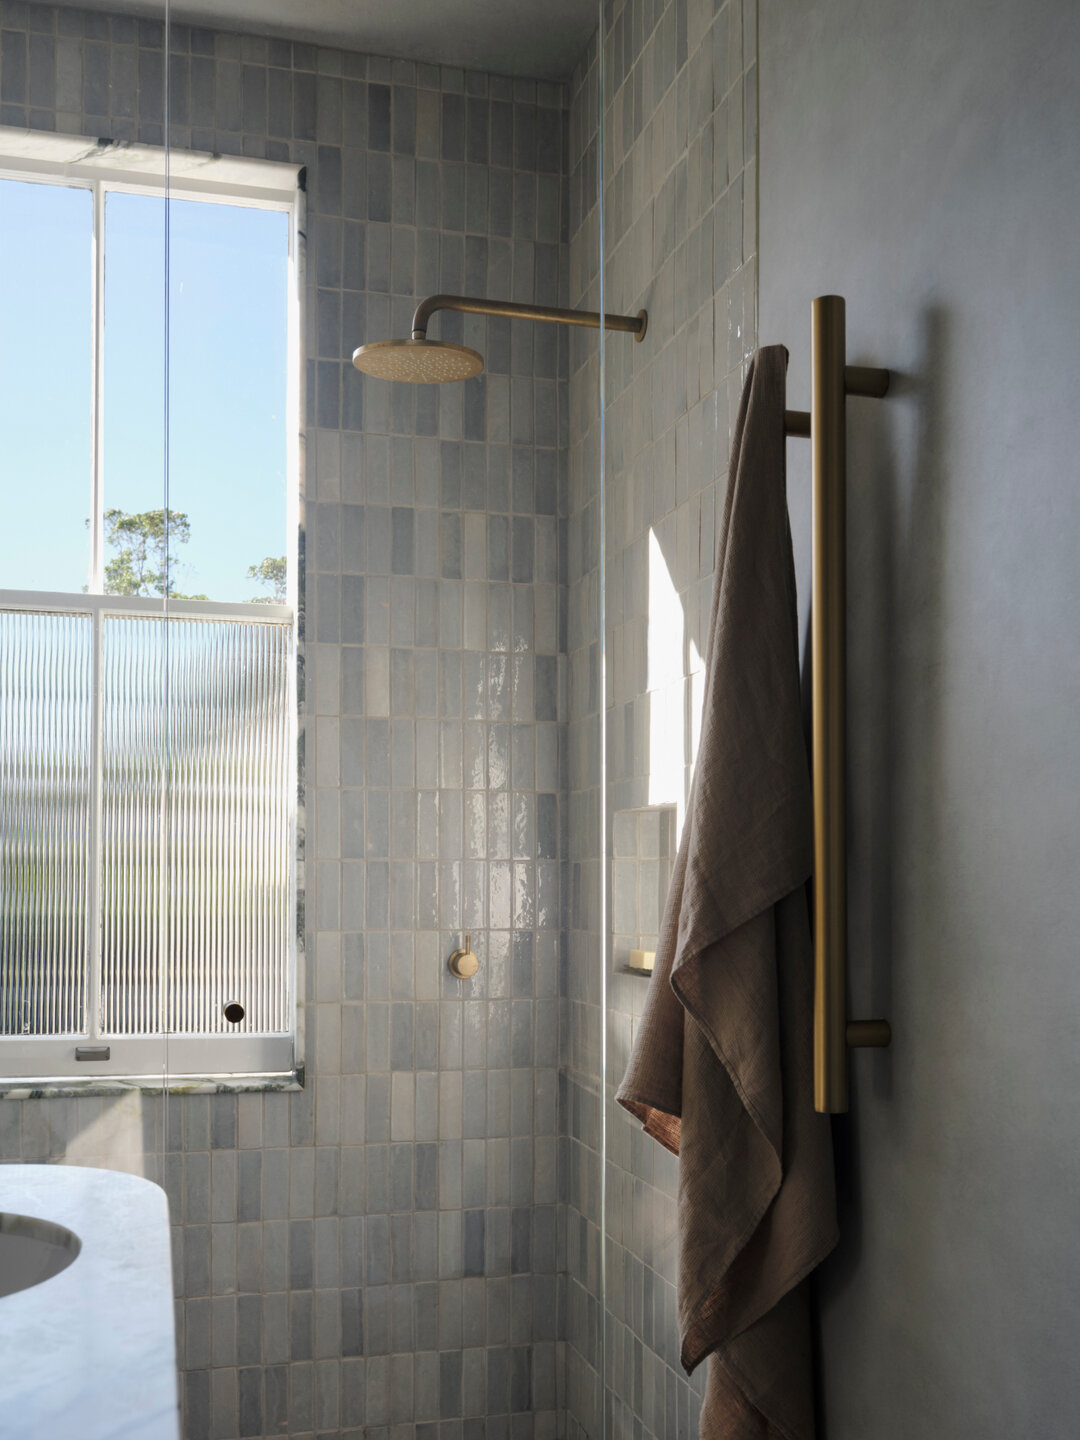 Master Ensuite shower featuring Moroccan handmade tiles in our Oatley House project⁣
.
.
.
.
Design: SE D&Eacute;A
Construction: @robertplumb.fix
Photography: @dave_wheeler
Styling: @atelier_lab_

Frama Bath Towel from @oliverthomstore

#oatleyhousep